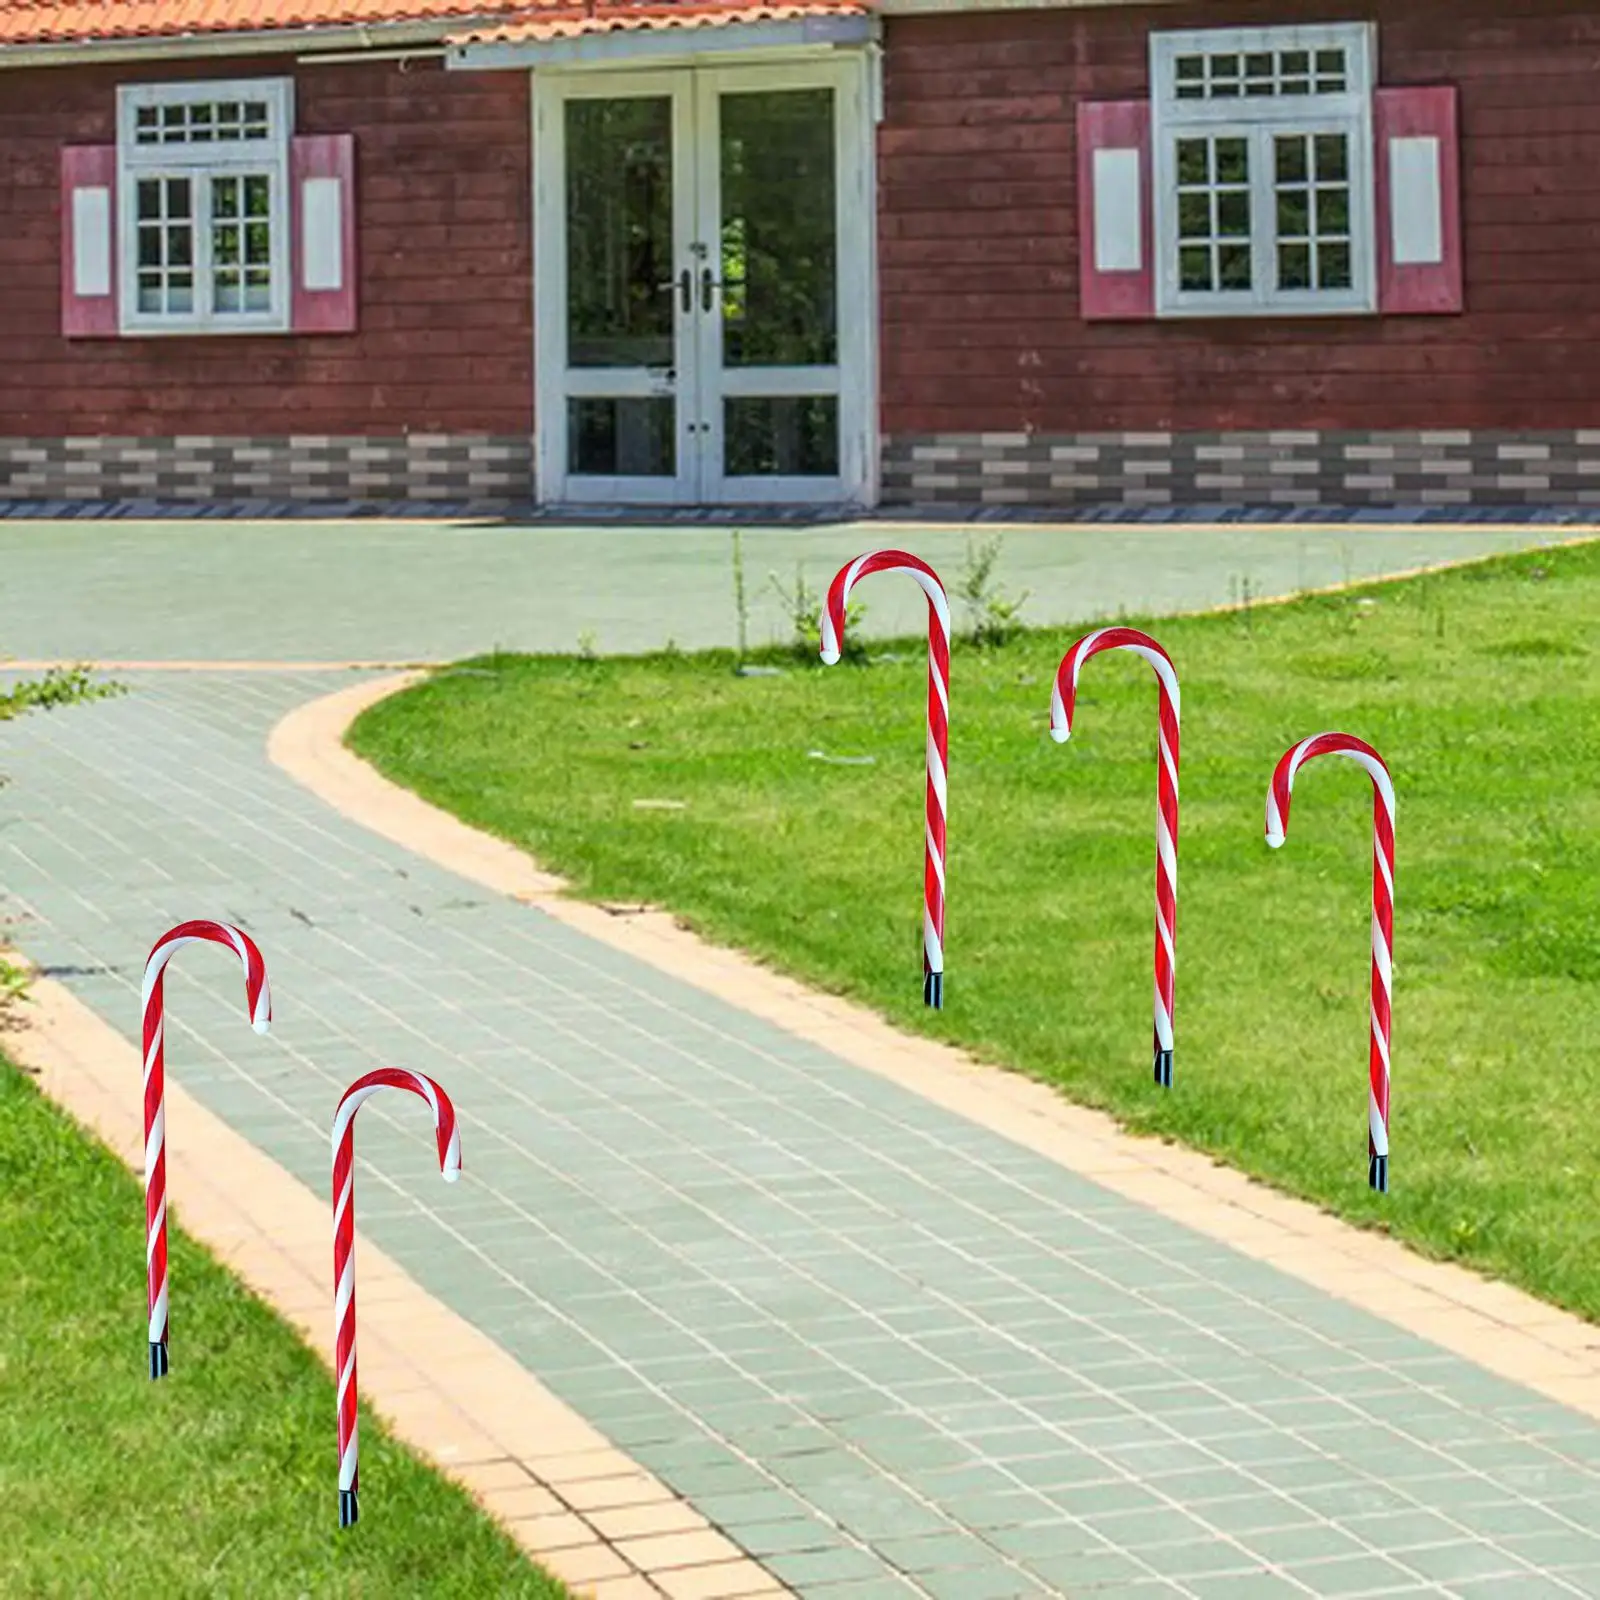 Christmas LED Lamps Ornaments with Ground Stakes Pathway Marker Candy Cane Solar Lights for Walkway Lawn Yard Holiday Outdoor